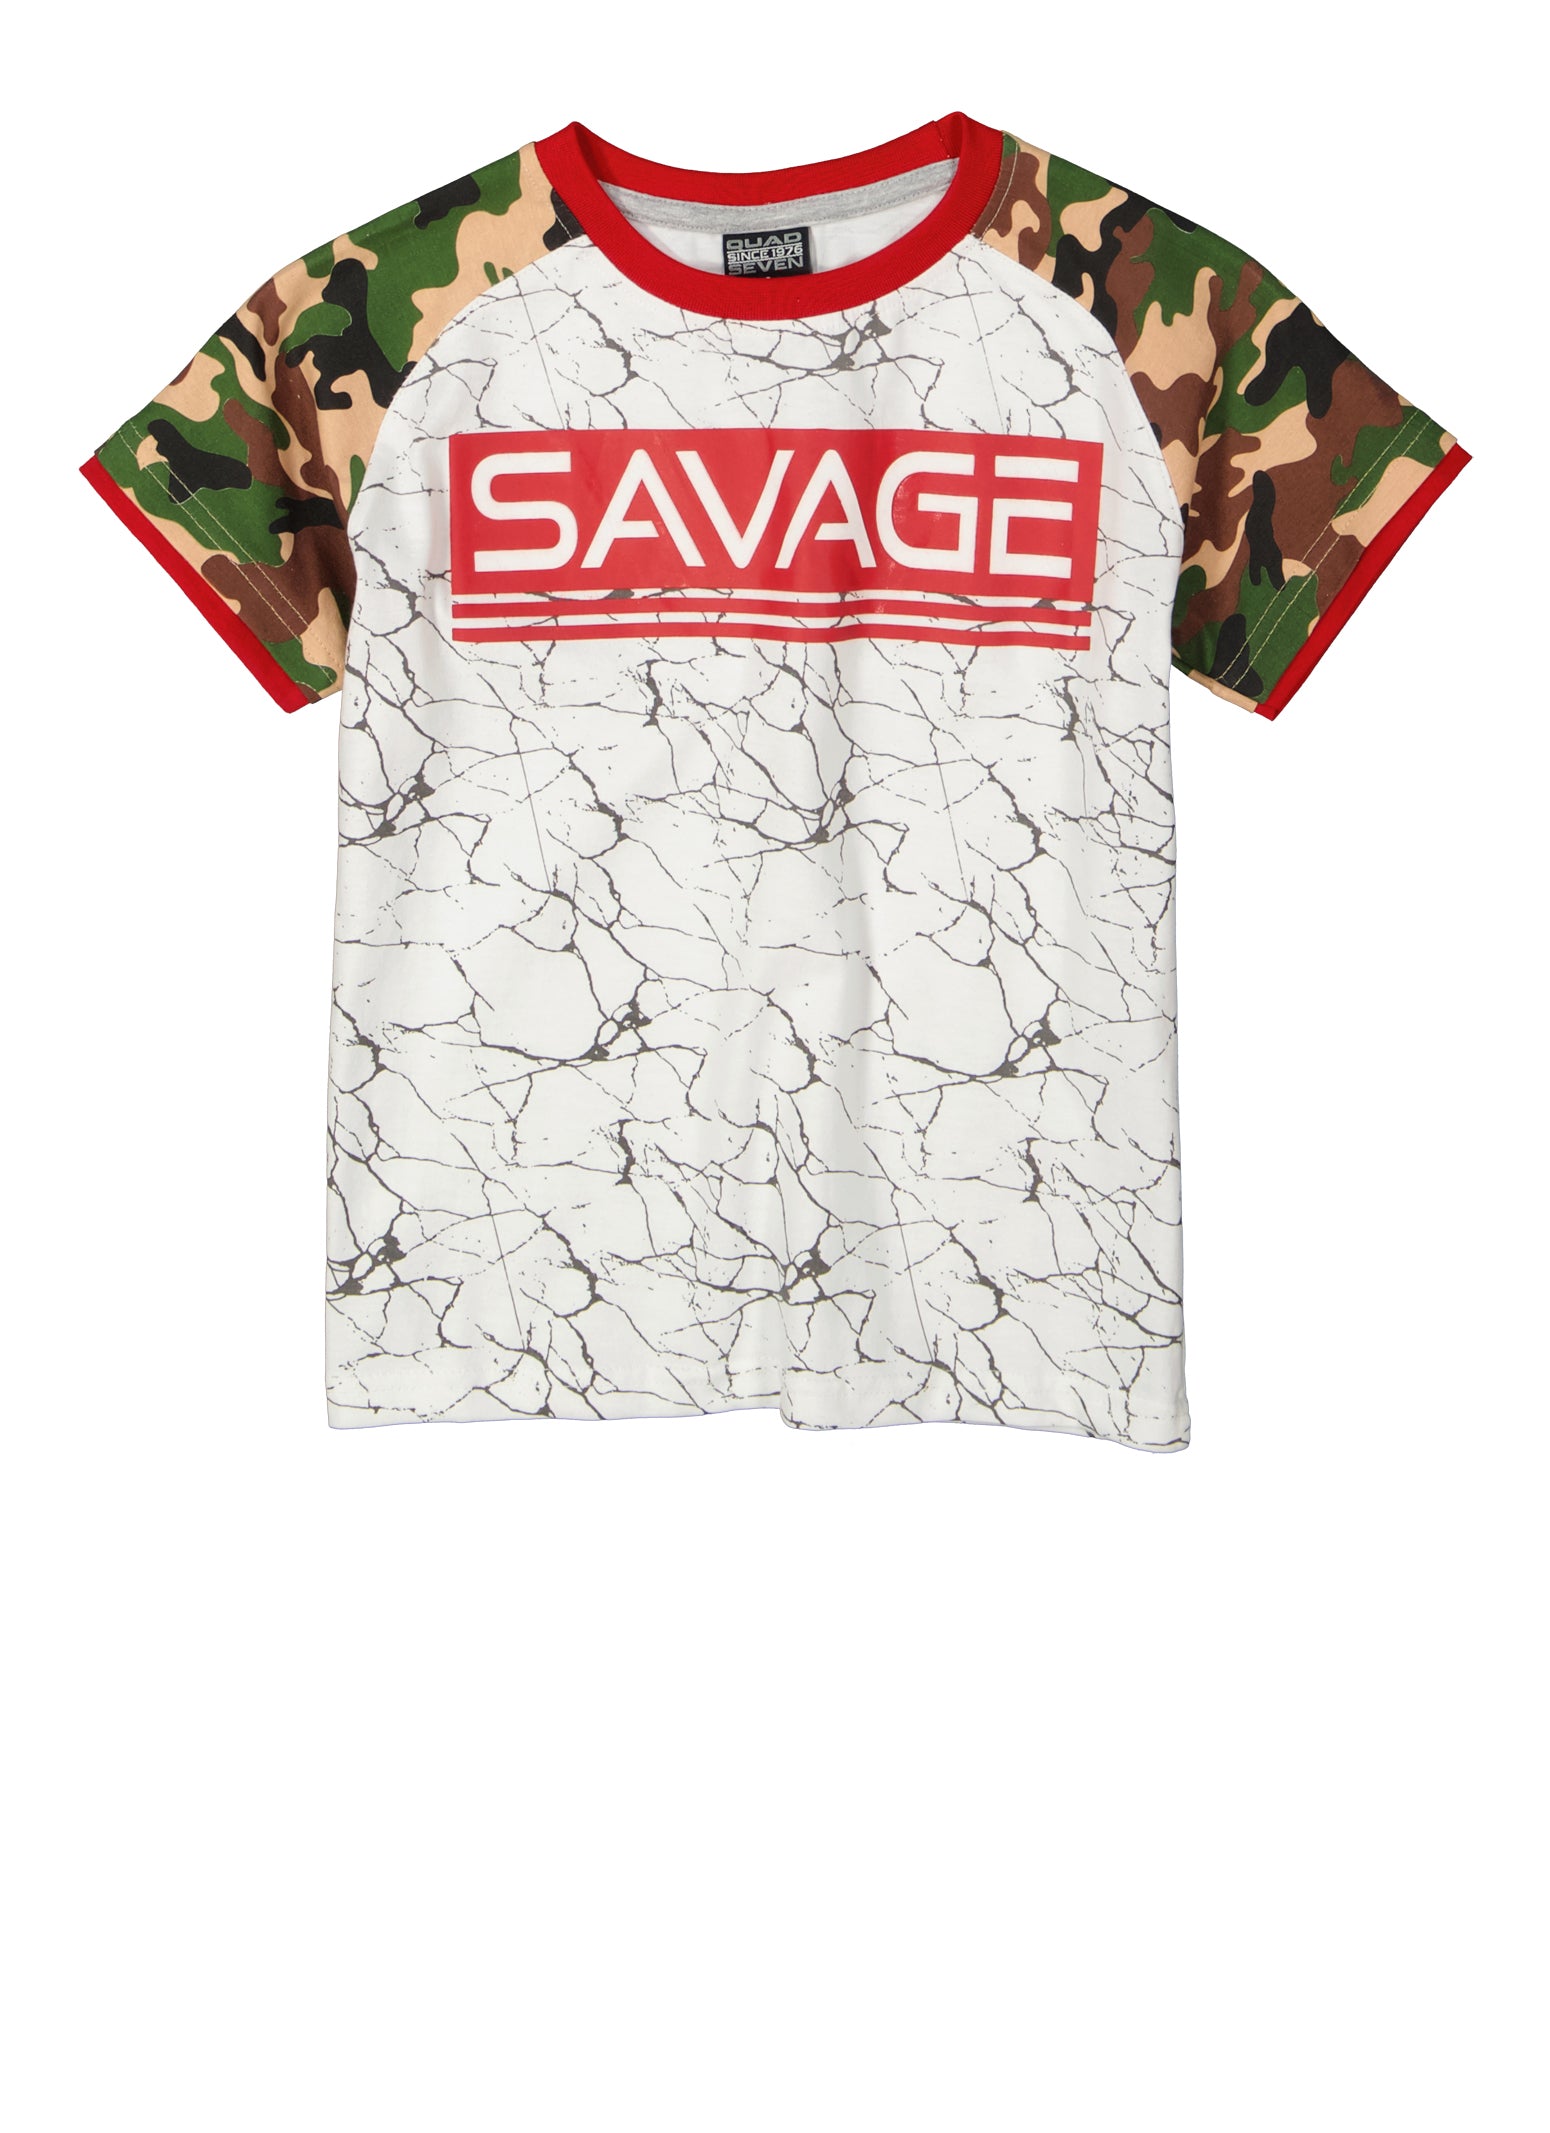 Savage Drip Clothing for Sale